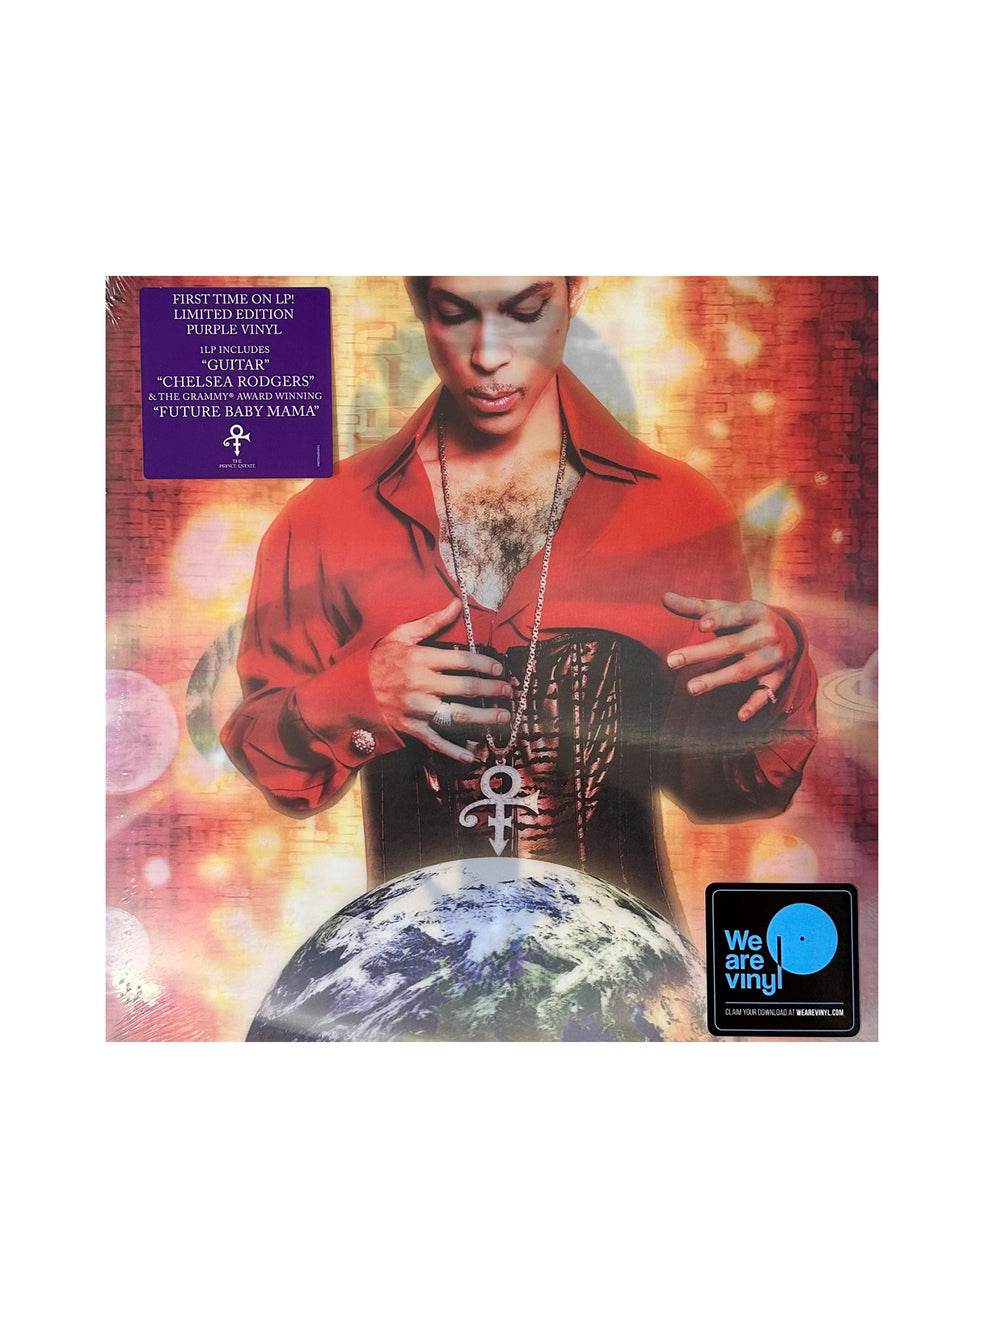 Prince – Planet Earth Vinyl LP Album Reissue Limited Edition  Lenticular Cover Sony NEW 2019